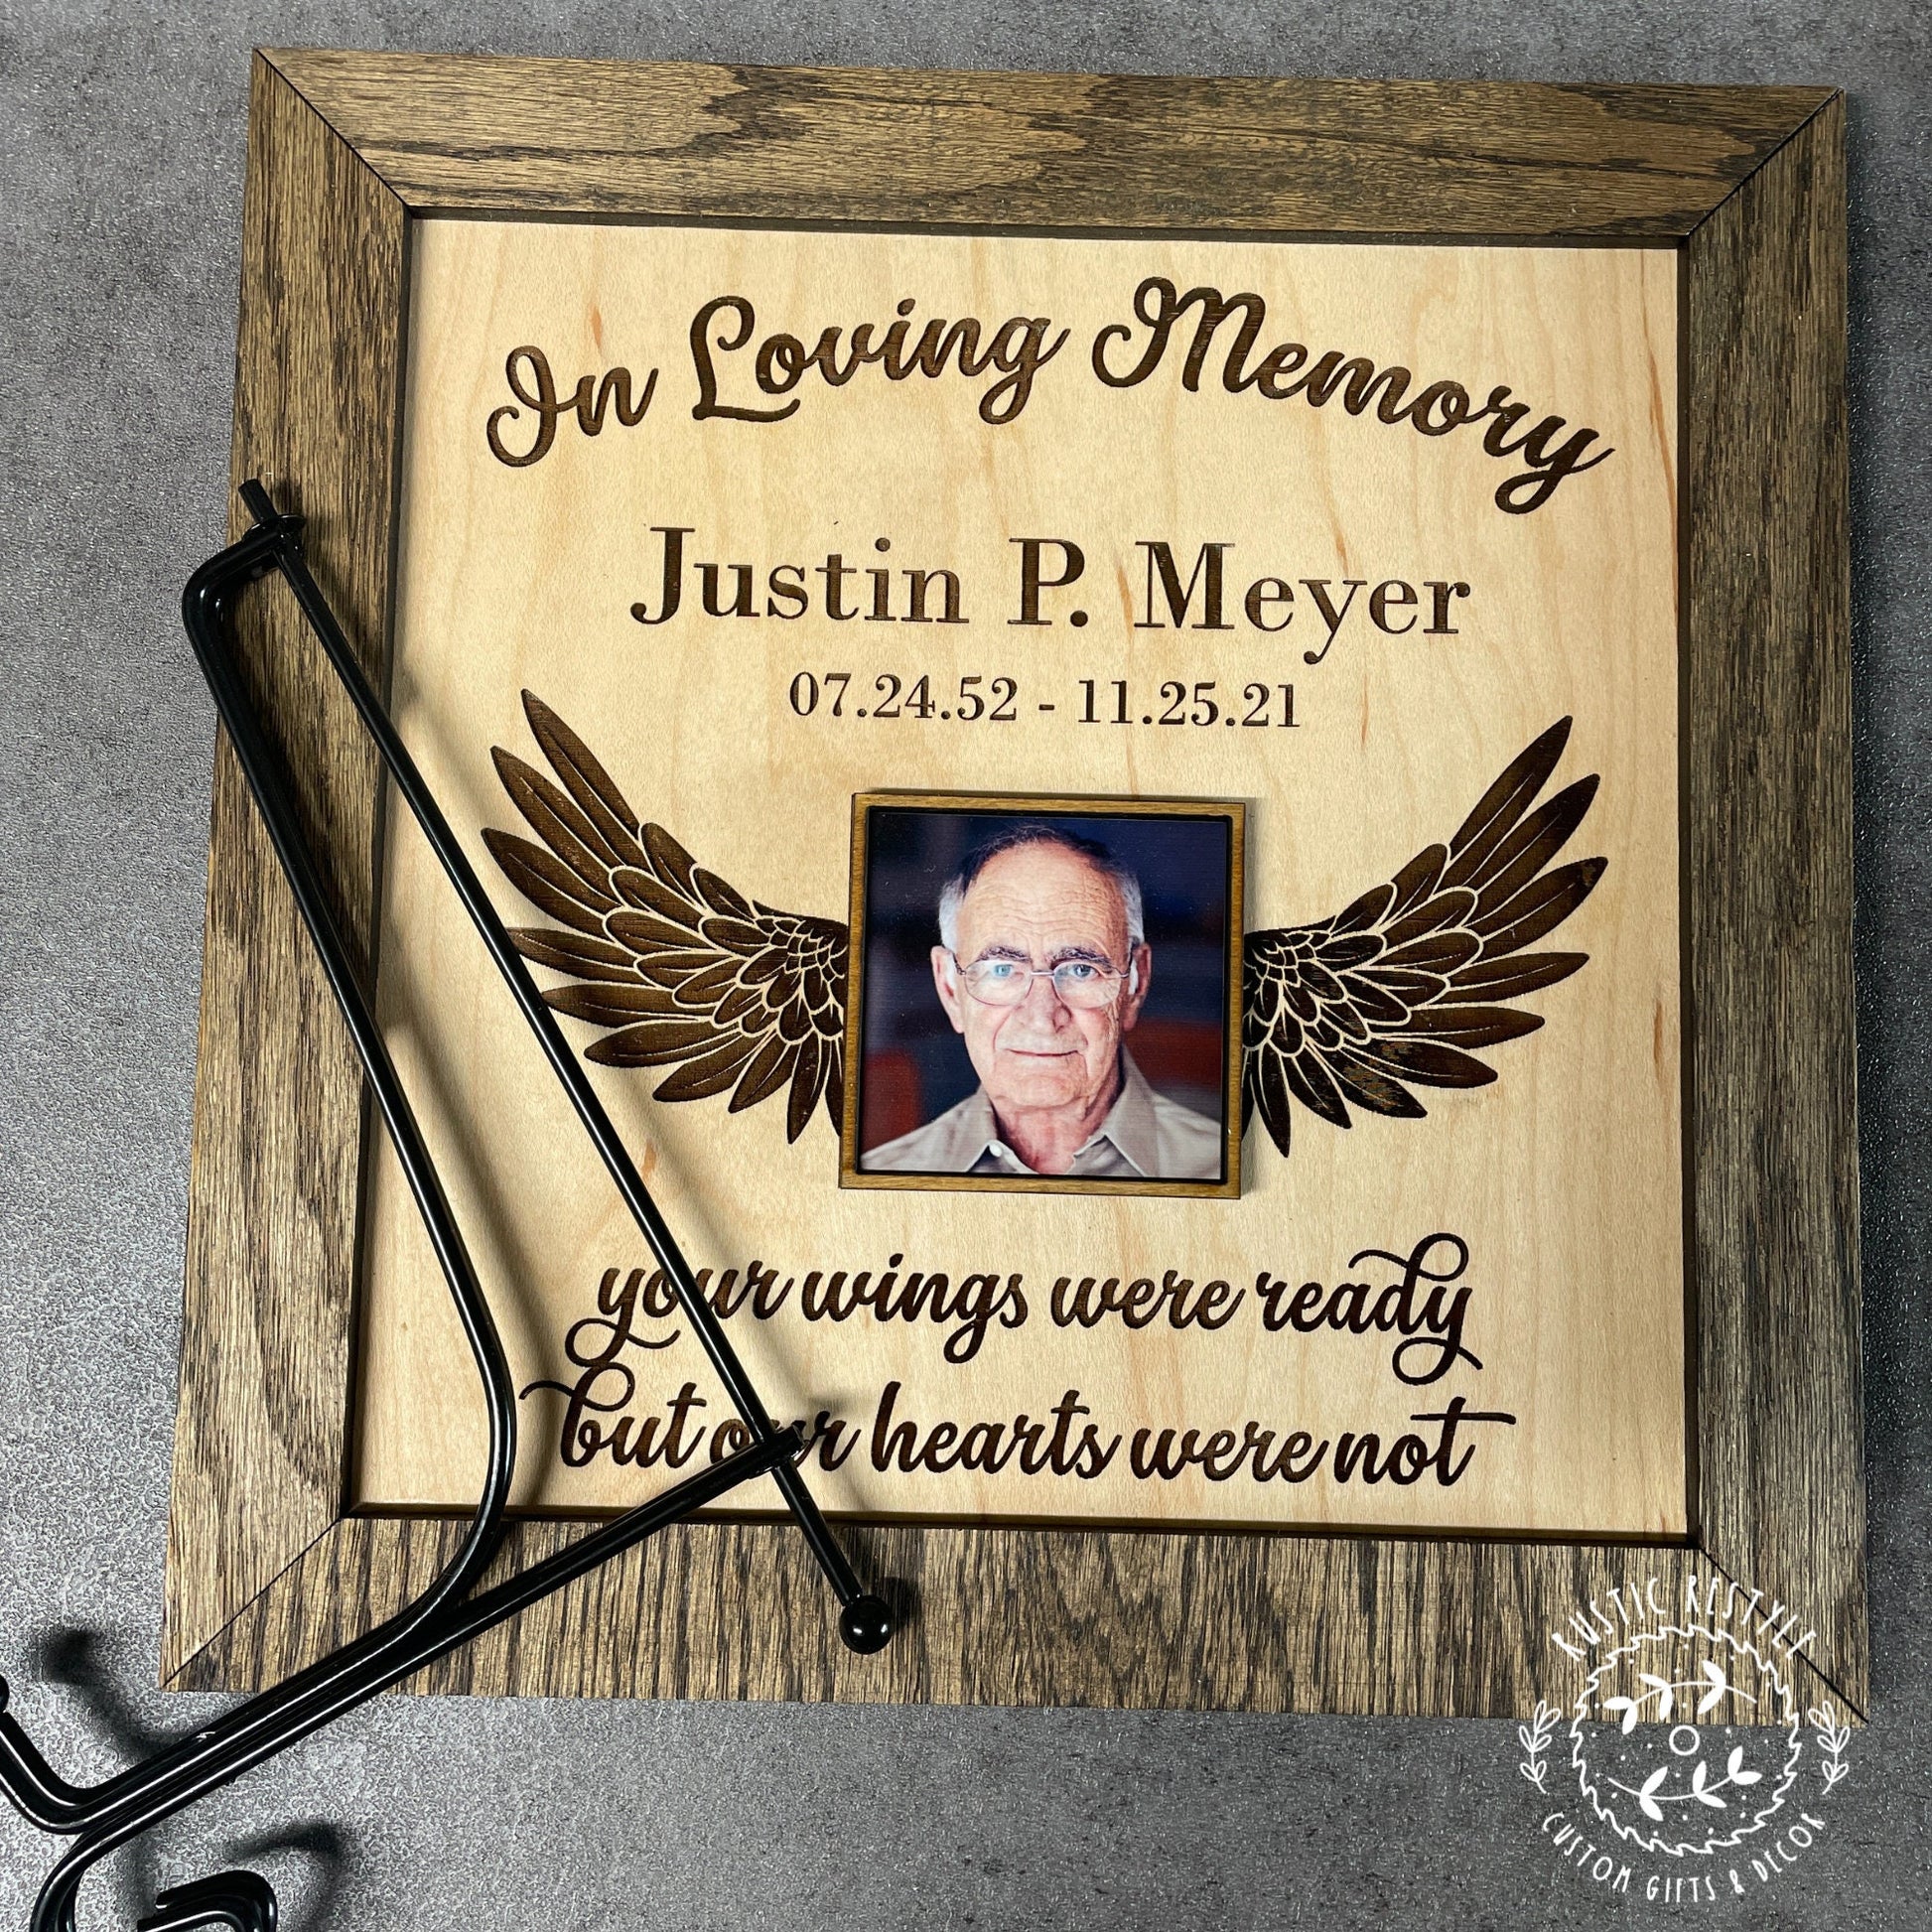 Memorial winged Remembrance Plaque, 10"x10" frame personalized with Engraved name and photo